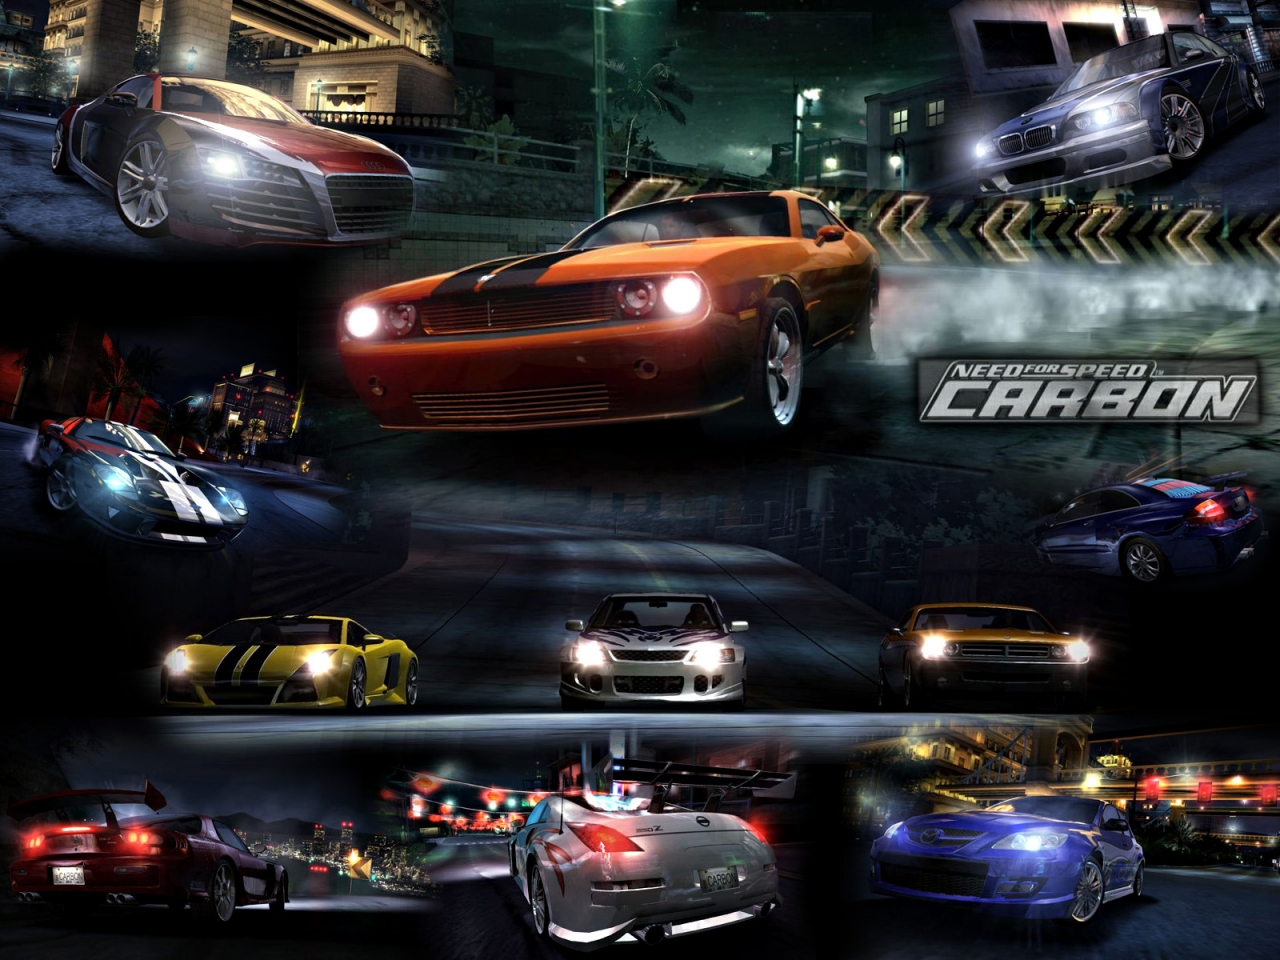 NFS Carbon for 1280 x 960 resolution